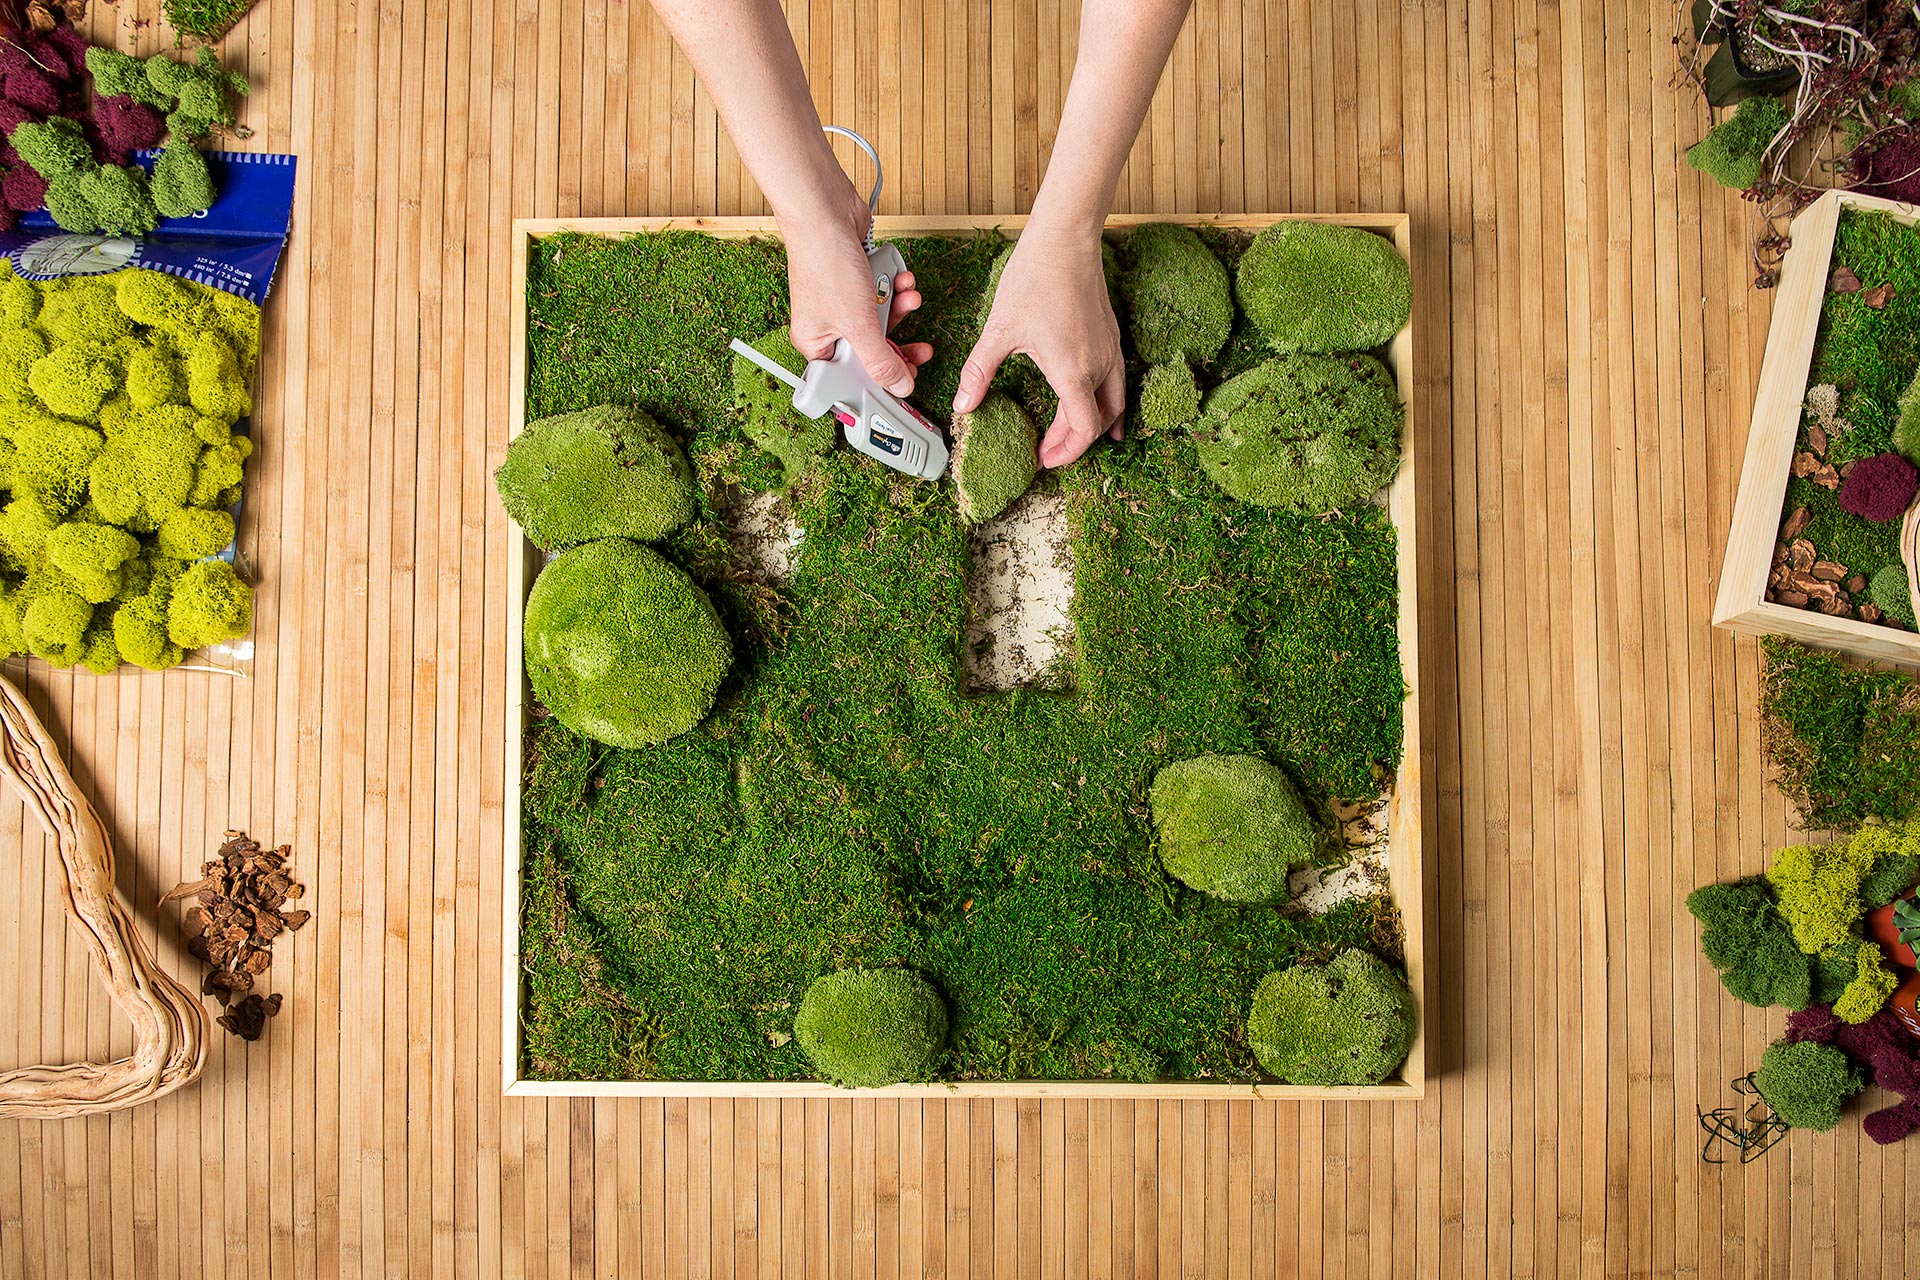 How to Make Your Own Moss Wall - SuperMoss